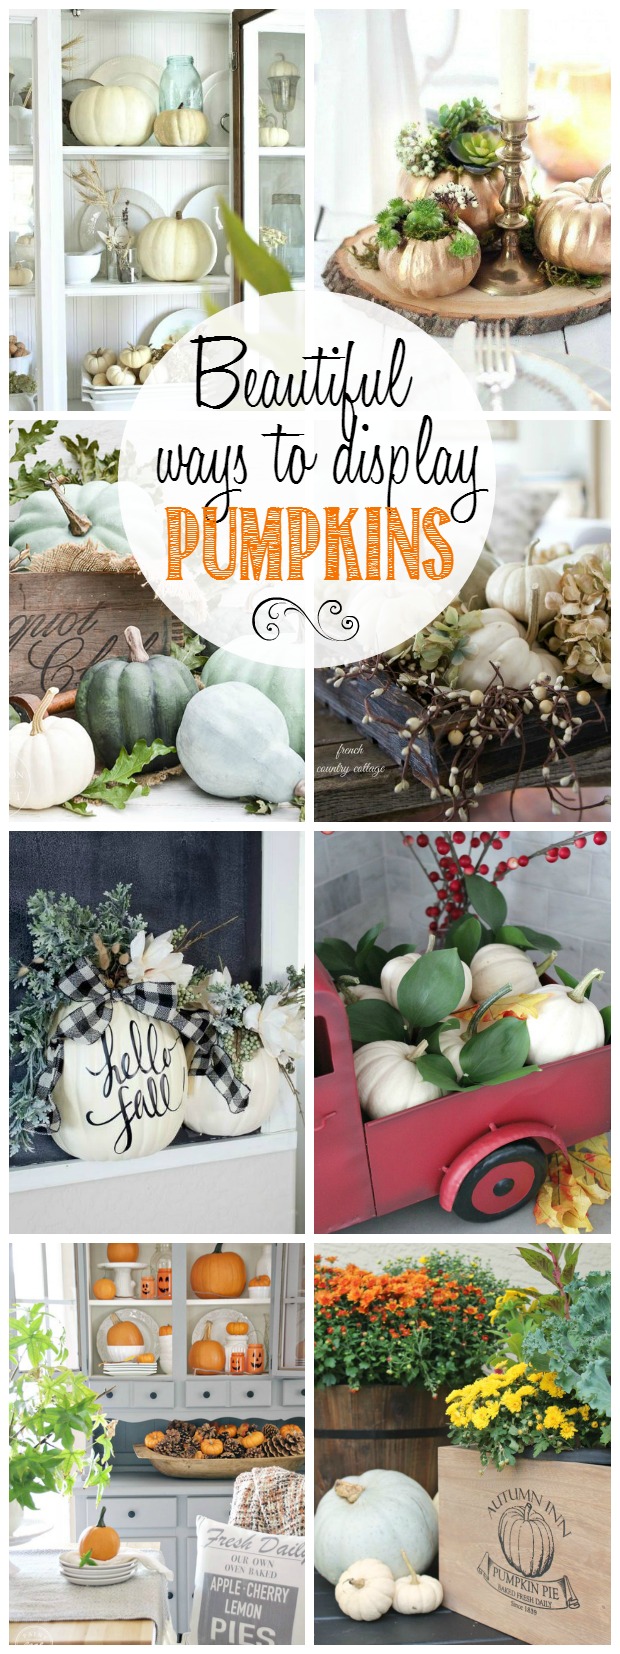 Beautiful ways to display pumpkins for your fall decor.